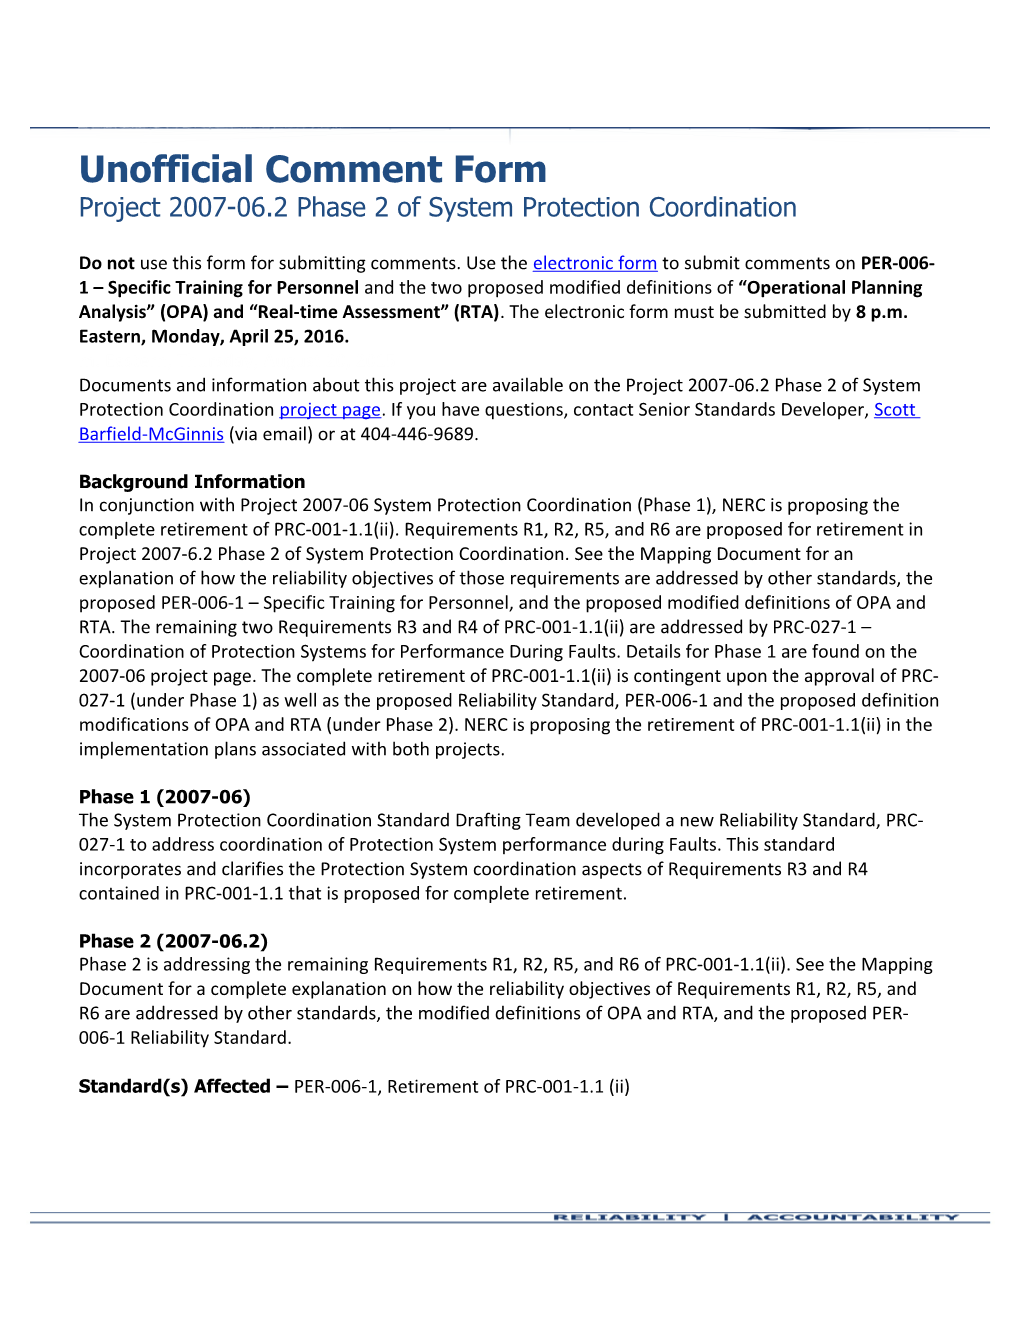 Project 2007-06.2 Unofficial Comment Form 2016 03 10 Posting